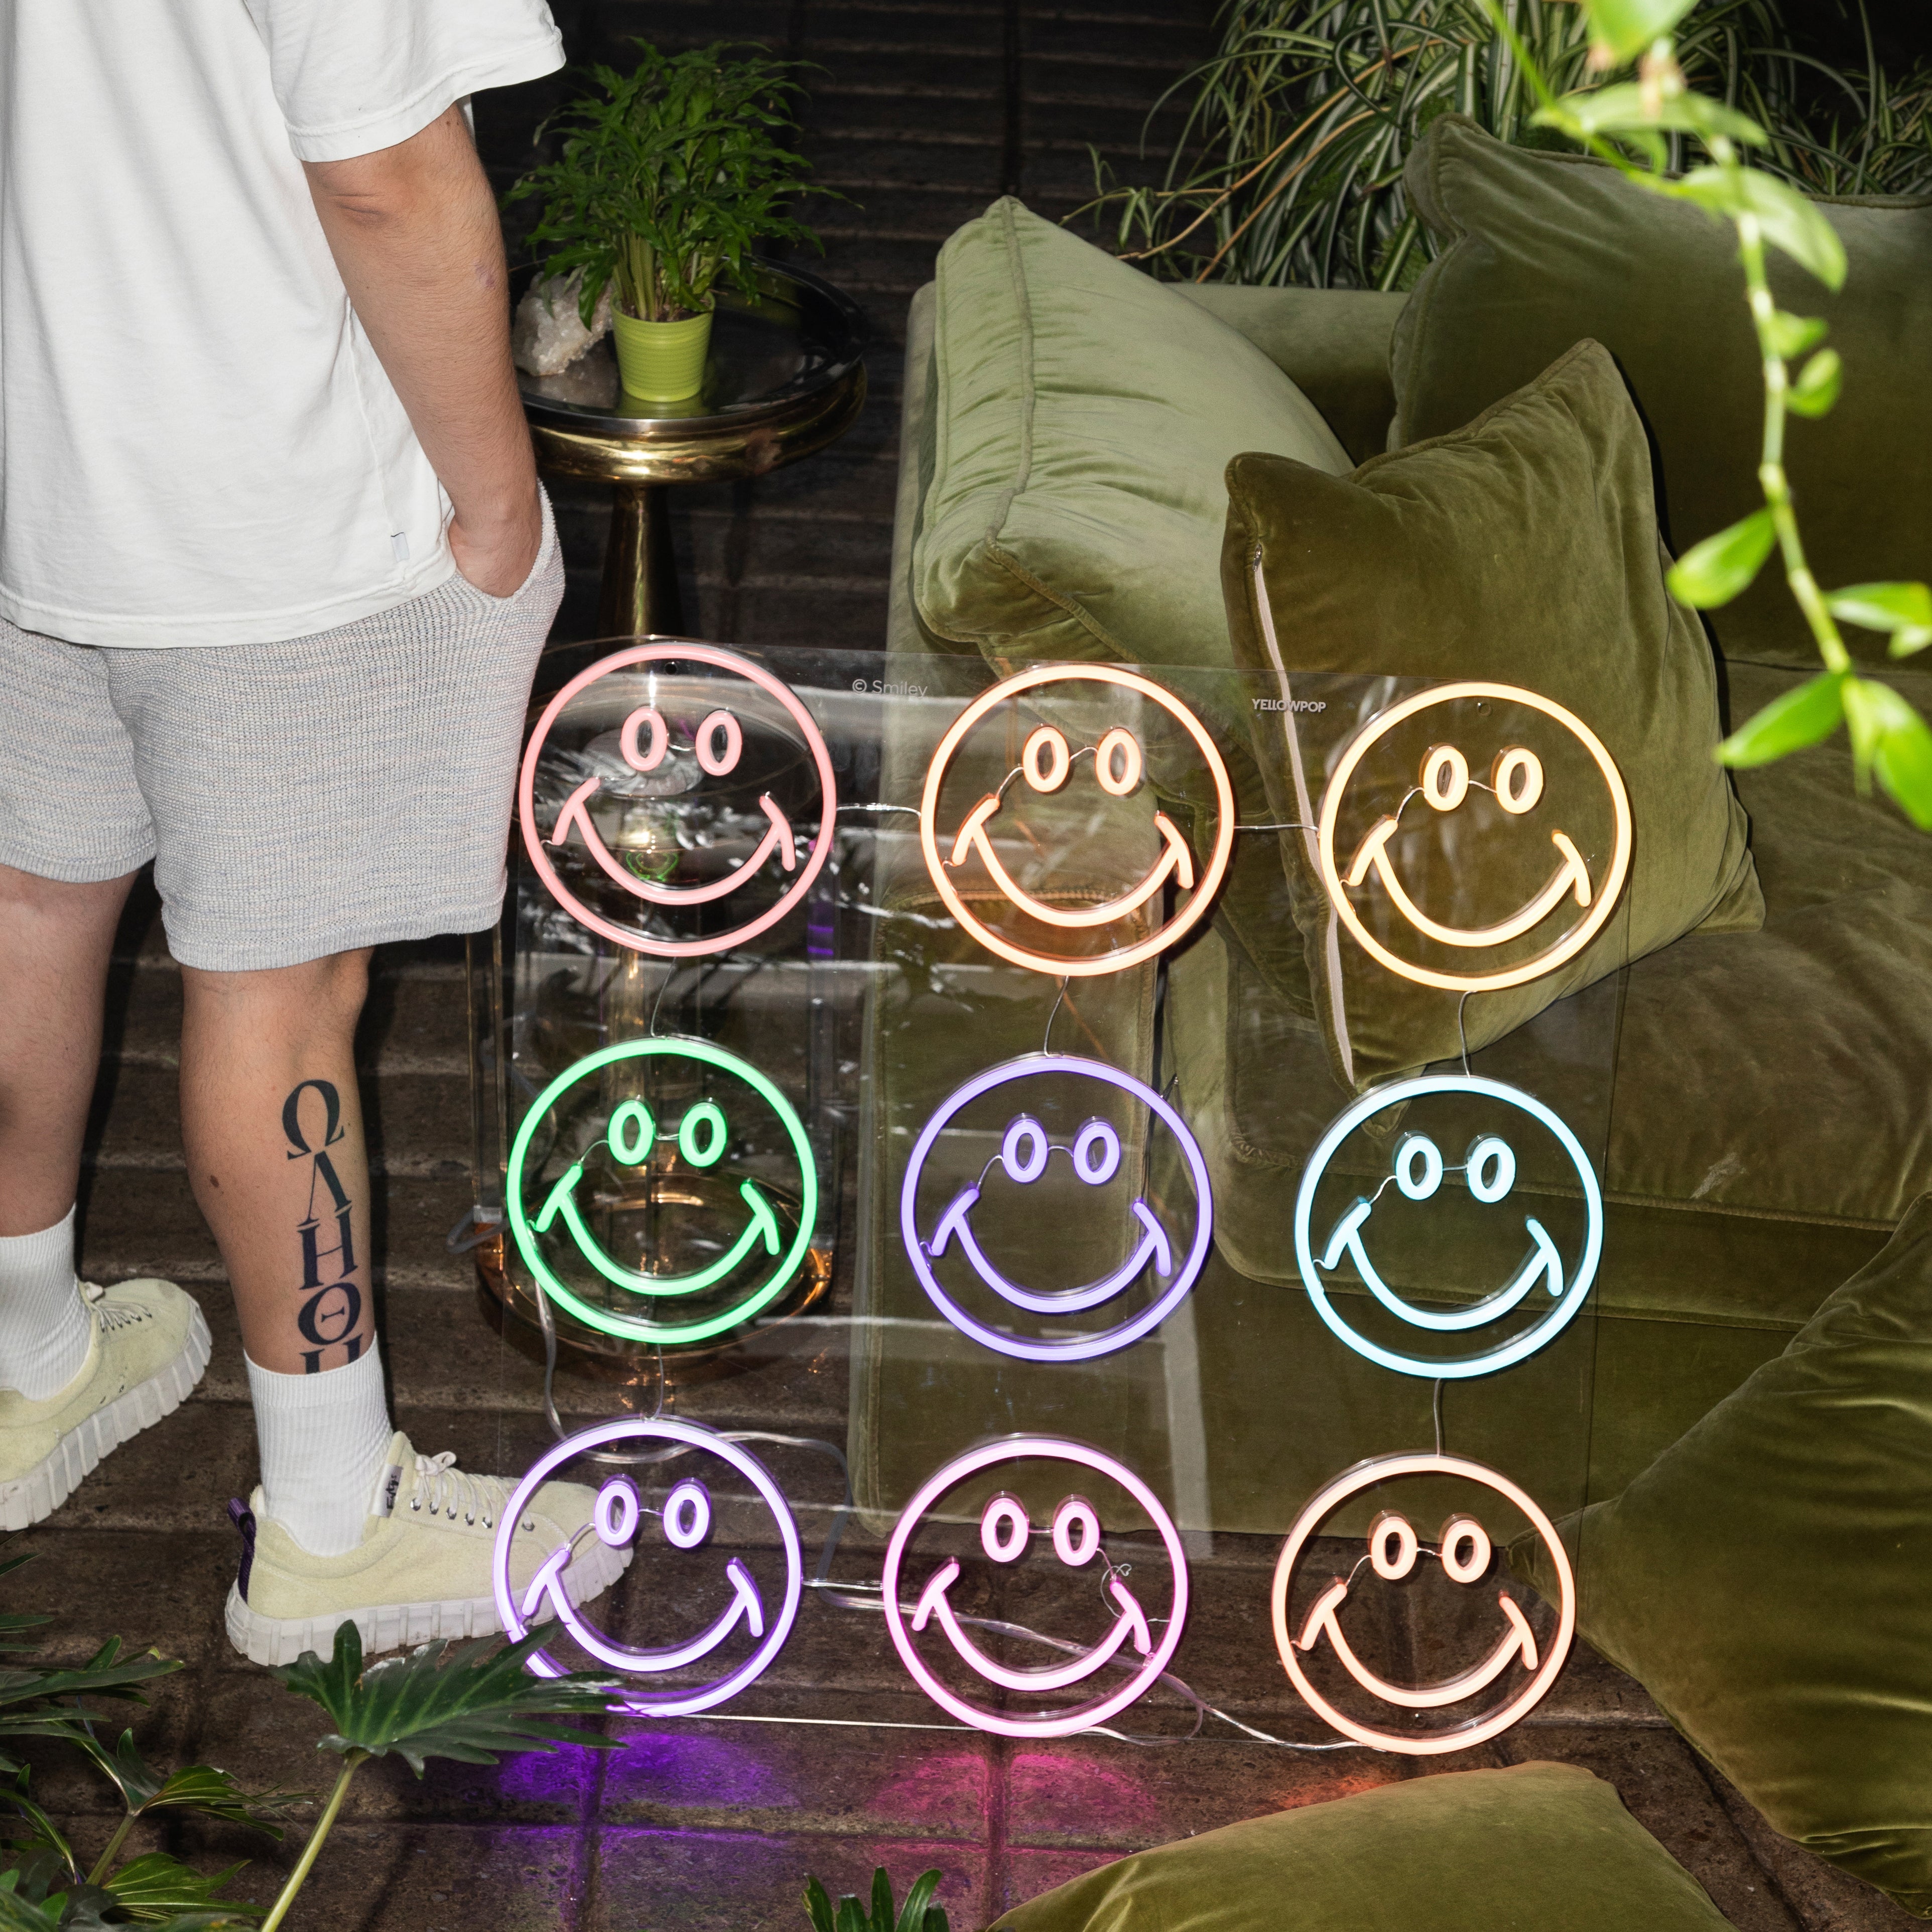 Smiley Wall by Smiley®, Neon Tabela - Neonbir